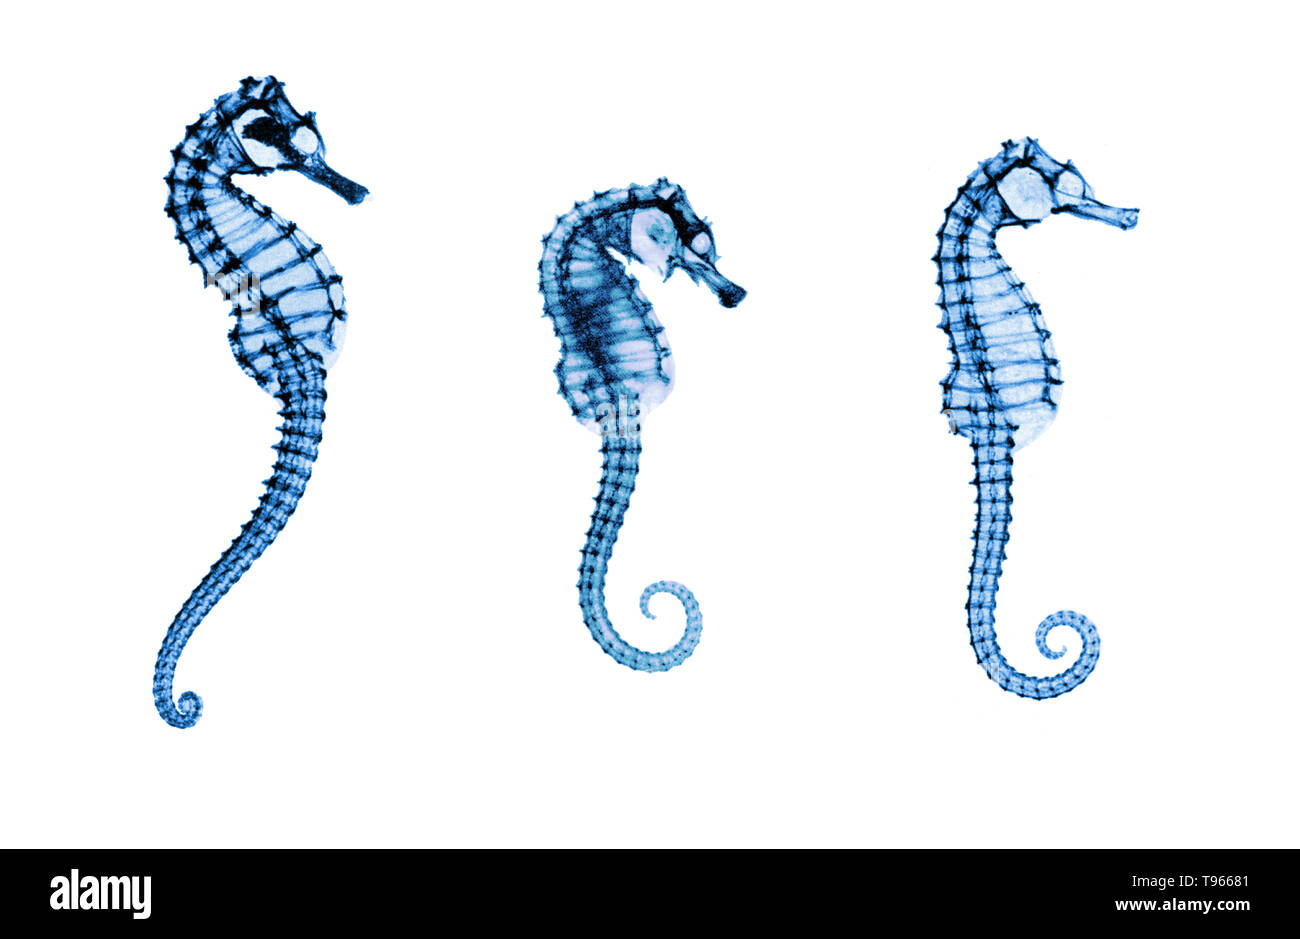 Composite image from historical x-rays of seahorses (Hippocampus sp.) made by E. C. le Grice. Stock Photo